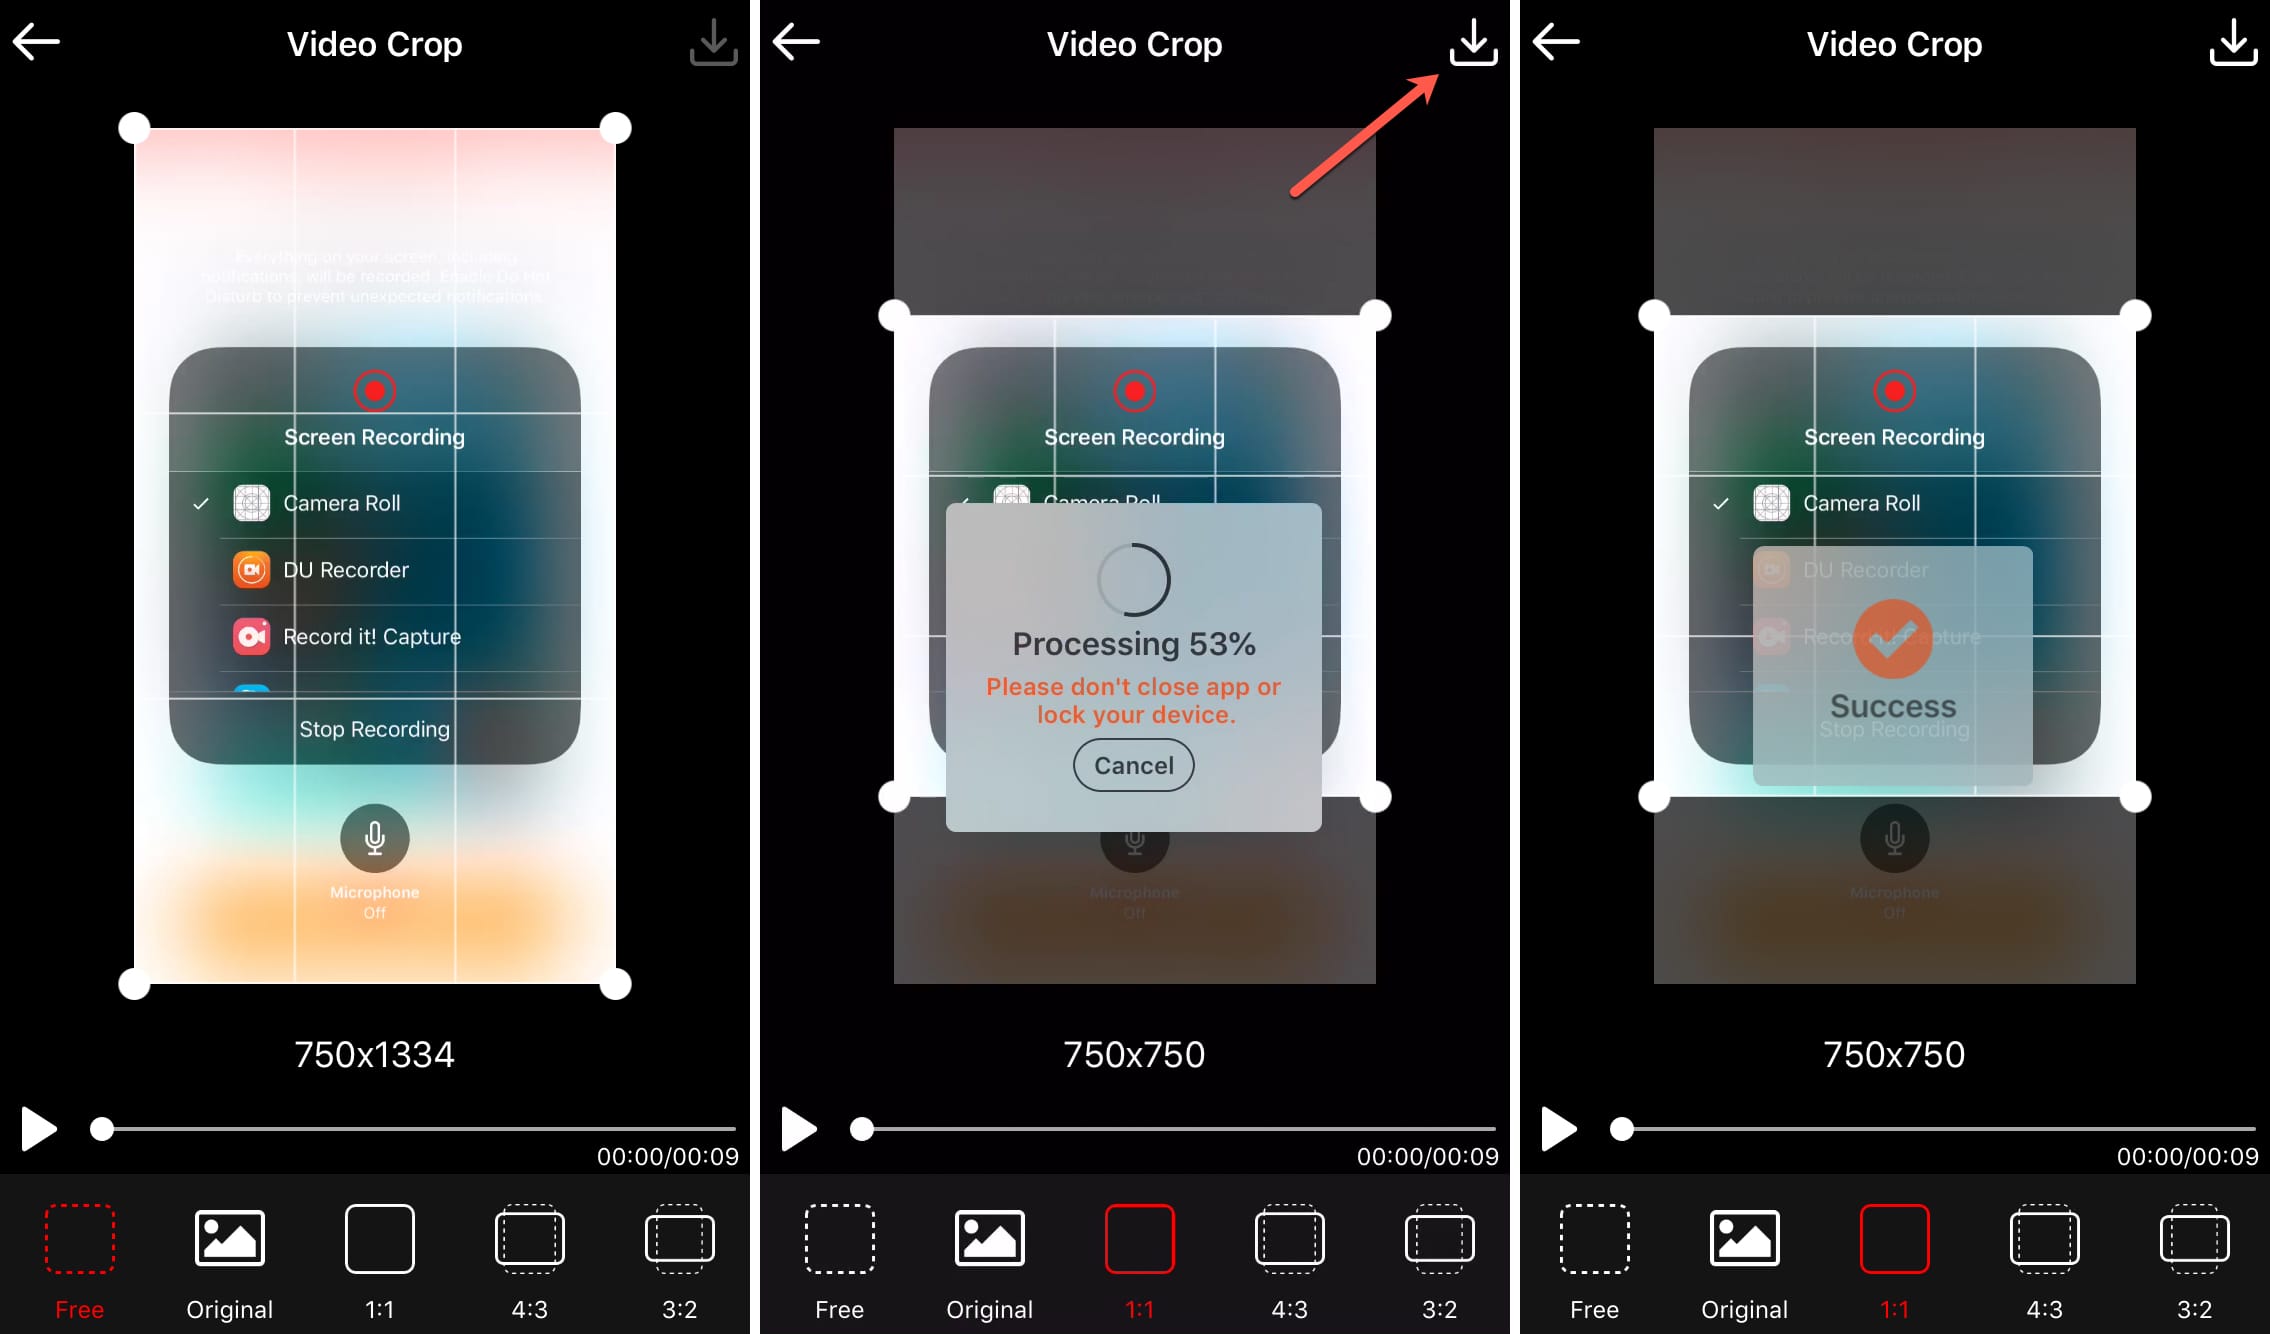 How to Crop Videos on iPhone